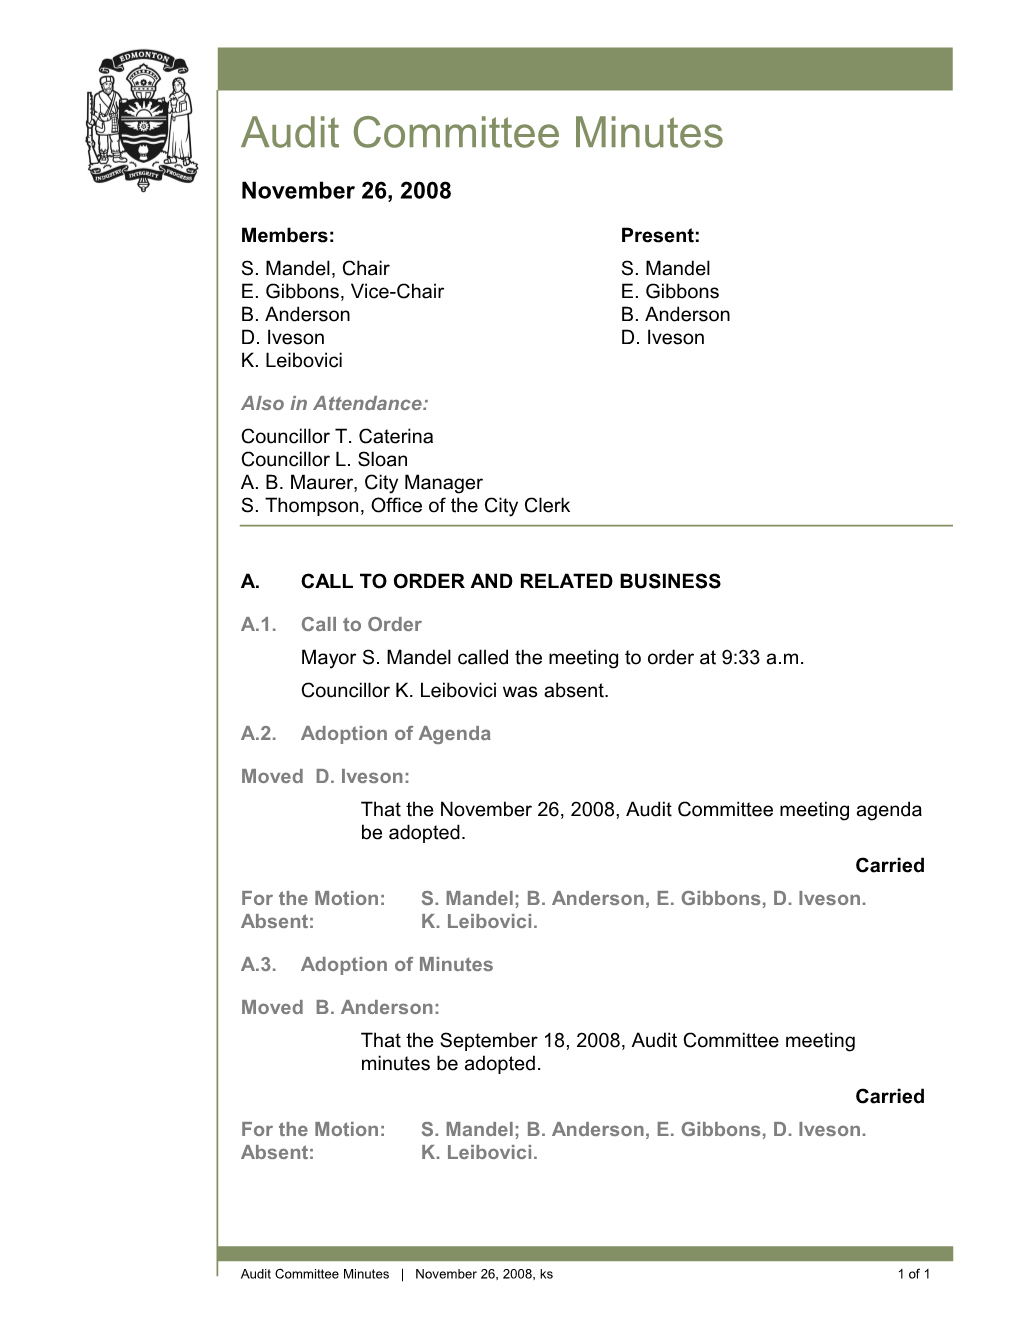 Minutes for Audit Committee November 26, 2008 Meeting